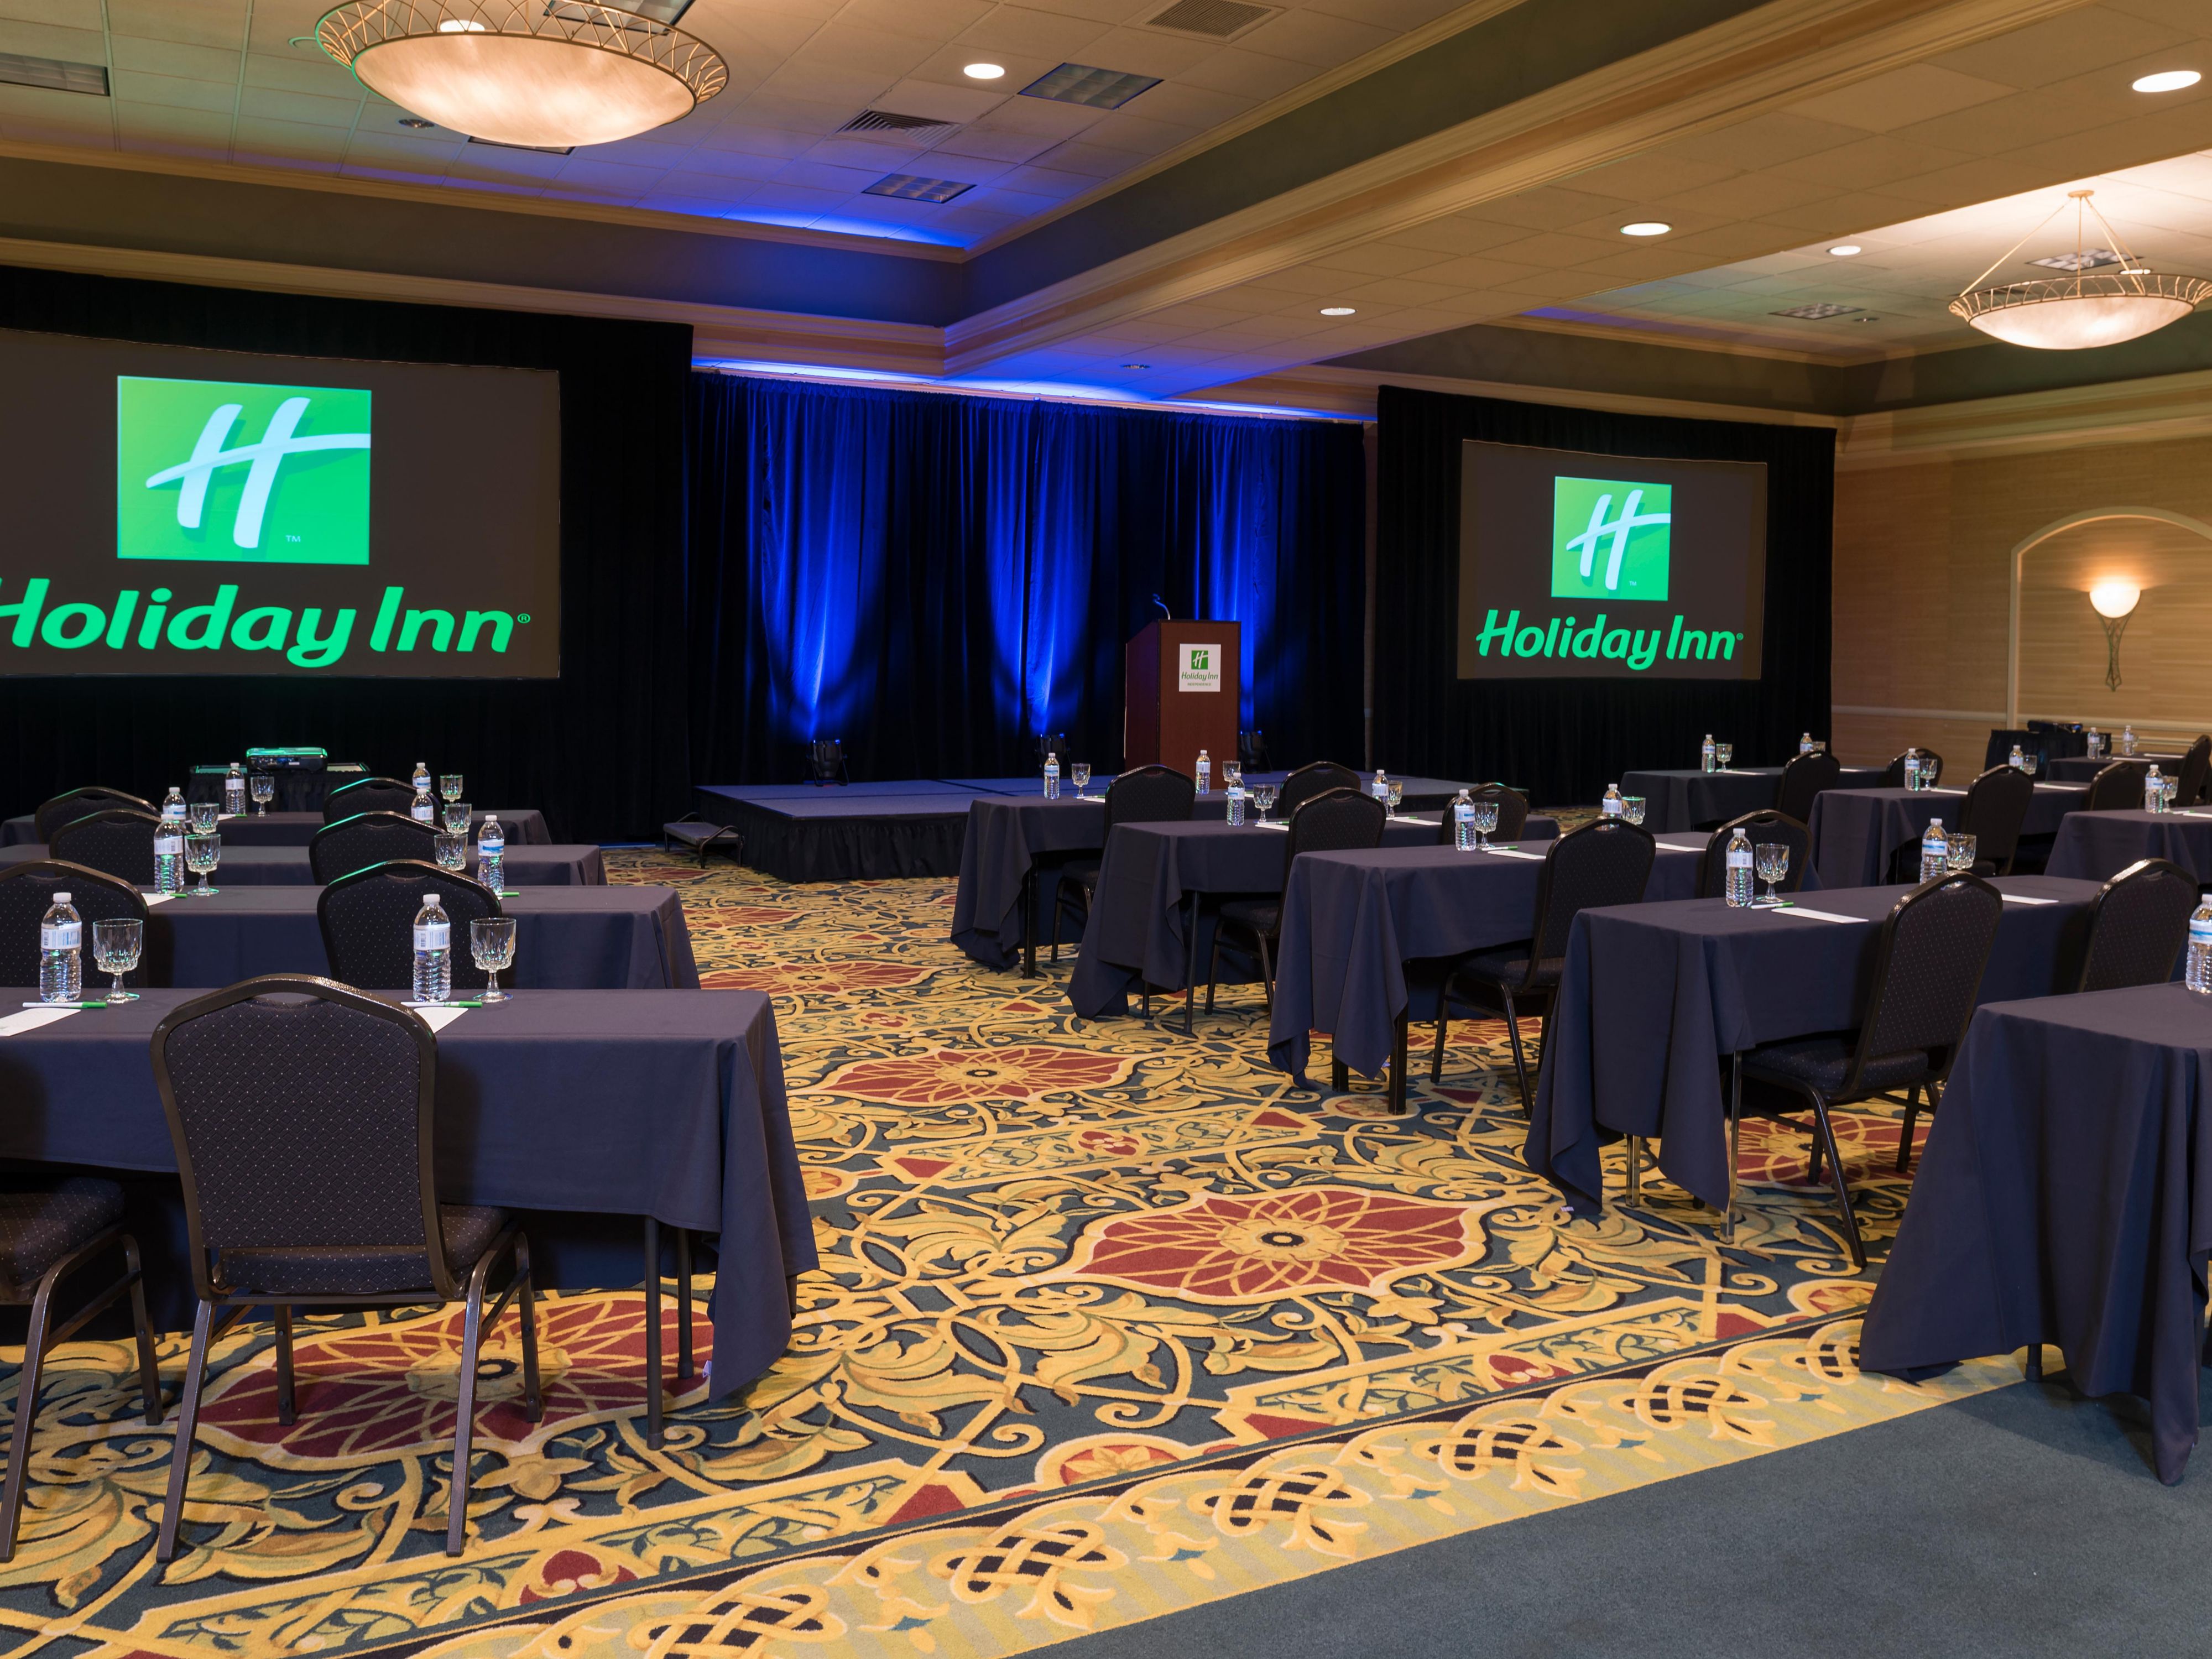 Whether you're planning an elaborate reception or a small business meeting, we have the flexible facilities to meet your needs and the friendly, professional staff to guide you through every detail. With more than 20,000 square feet of function space, our flexible meeting rooms can be arranged to accommodate 50 to 1000 guests.